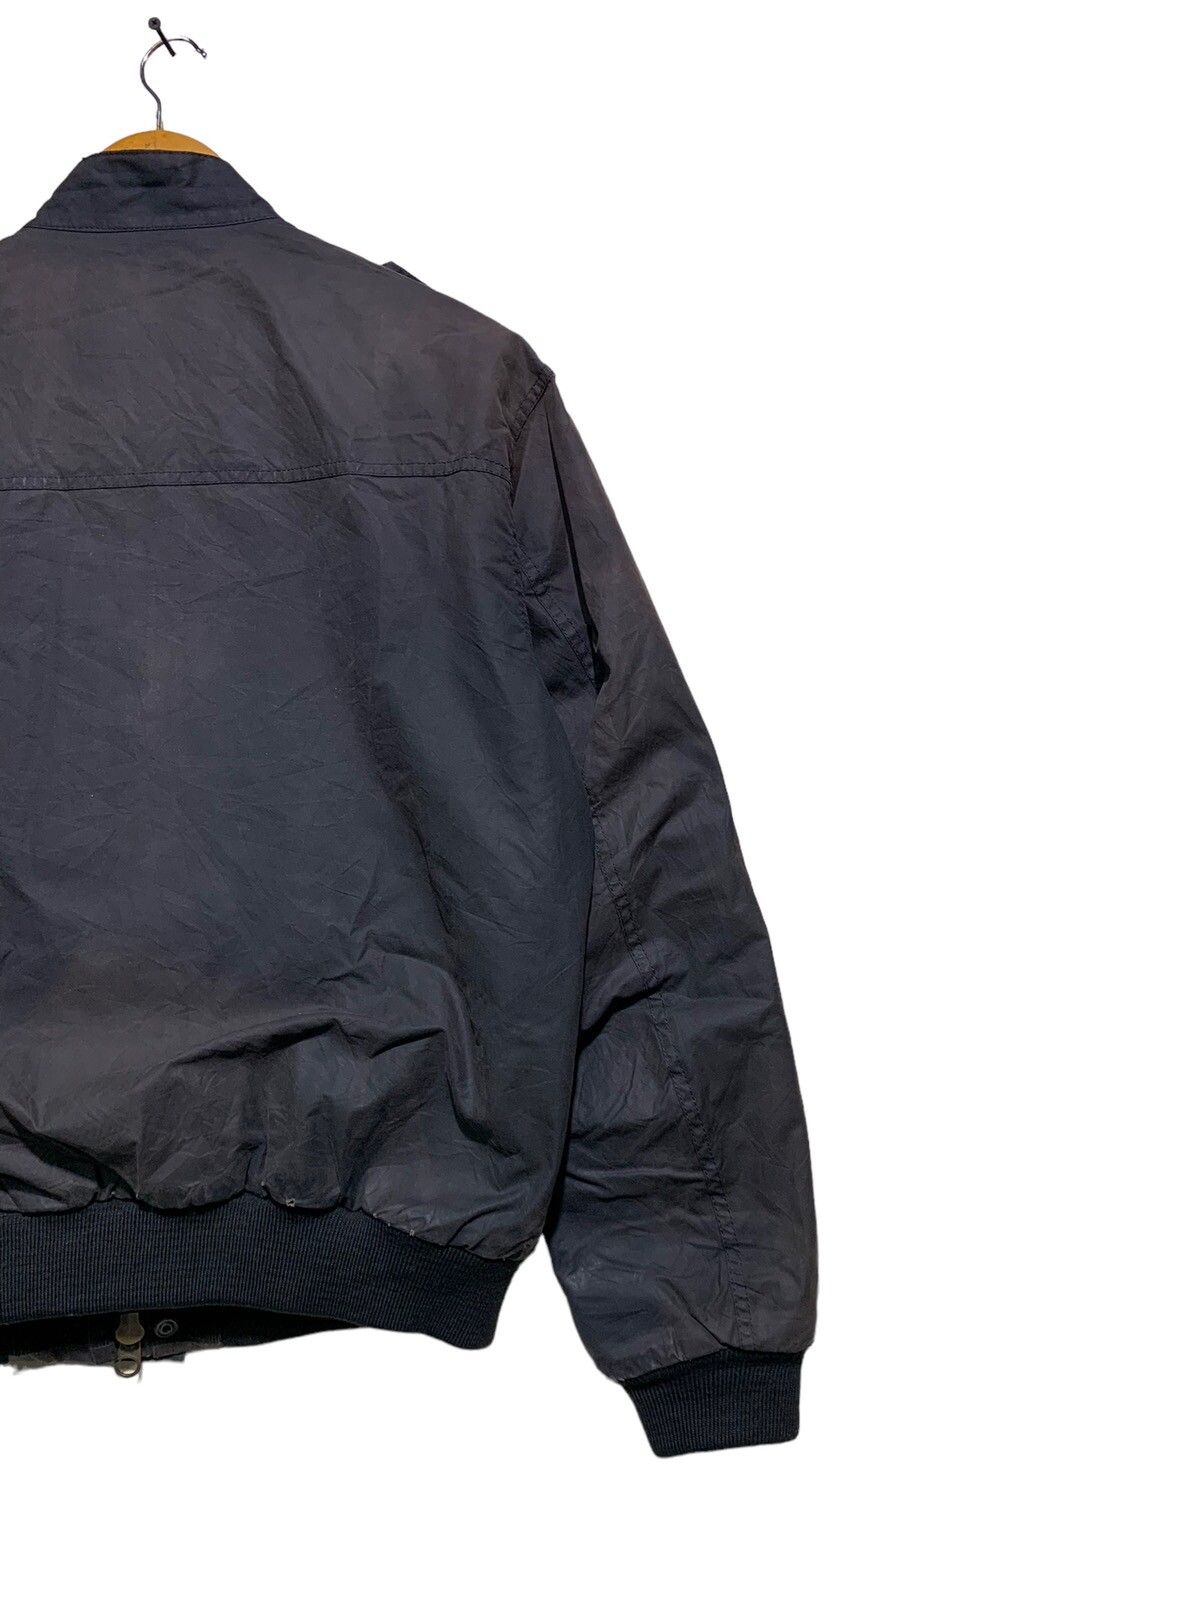 🔥BARBOUR INTERNATIONAL WAXED BOMBER JACKETS - 7